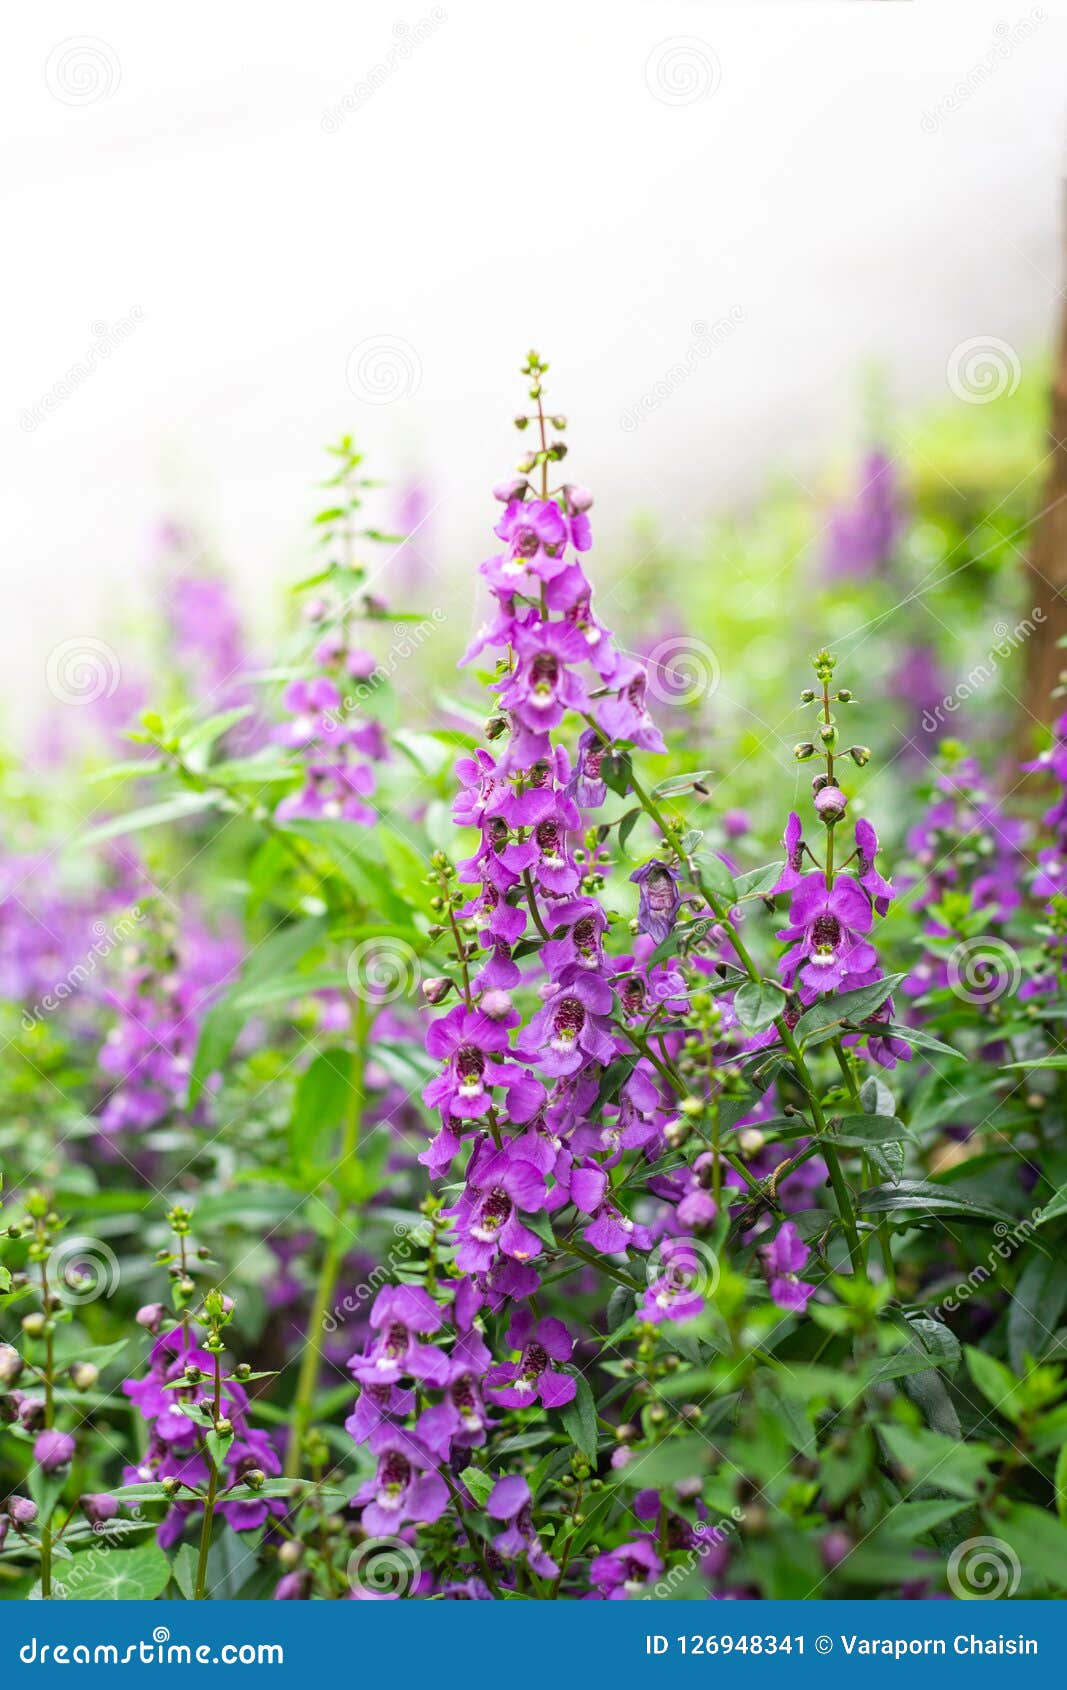 Summer Snapdragon Angelonia Flowers In The Field Stock Image Image Of Flora Beauty 126948341